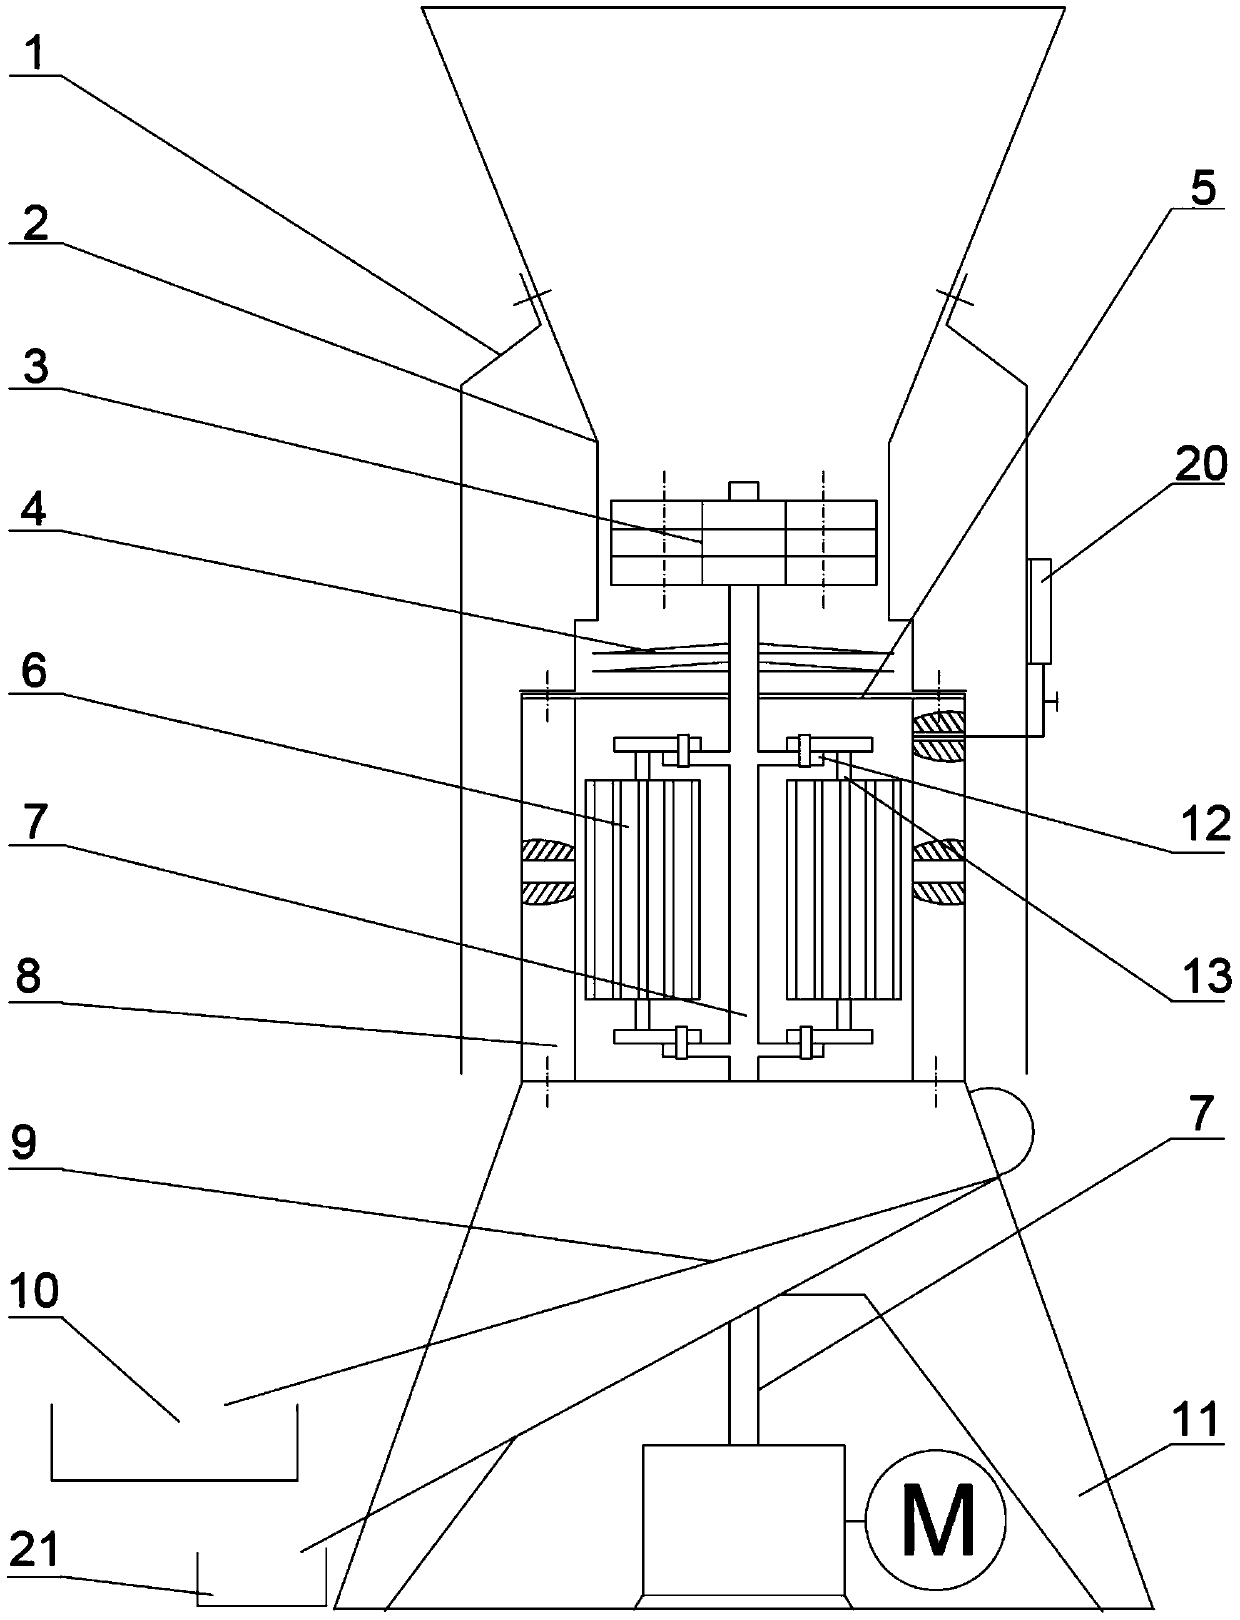 A vertical coaxial biomass crushing and forming integrated device